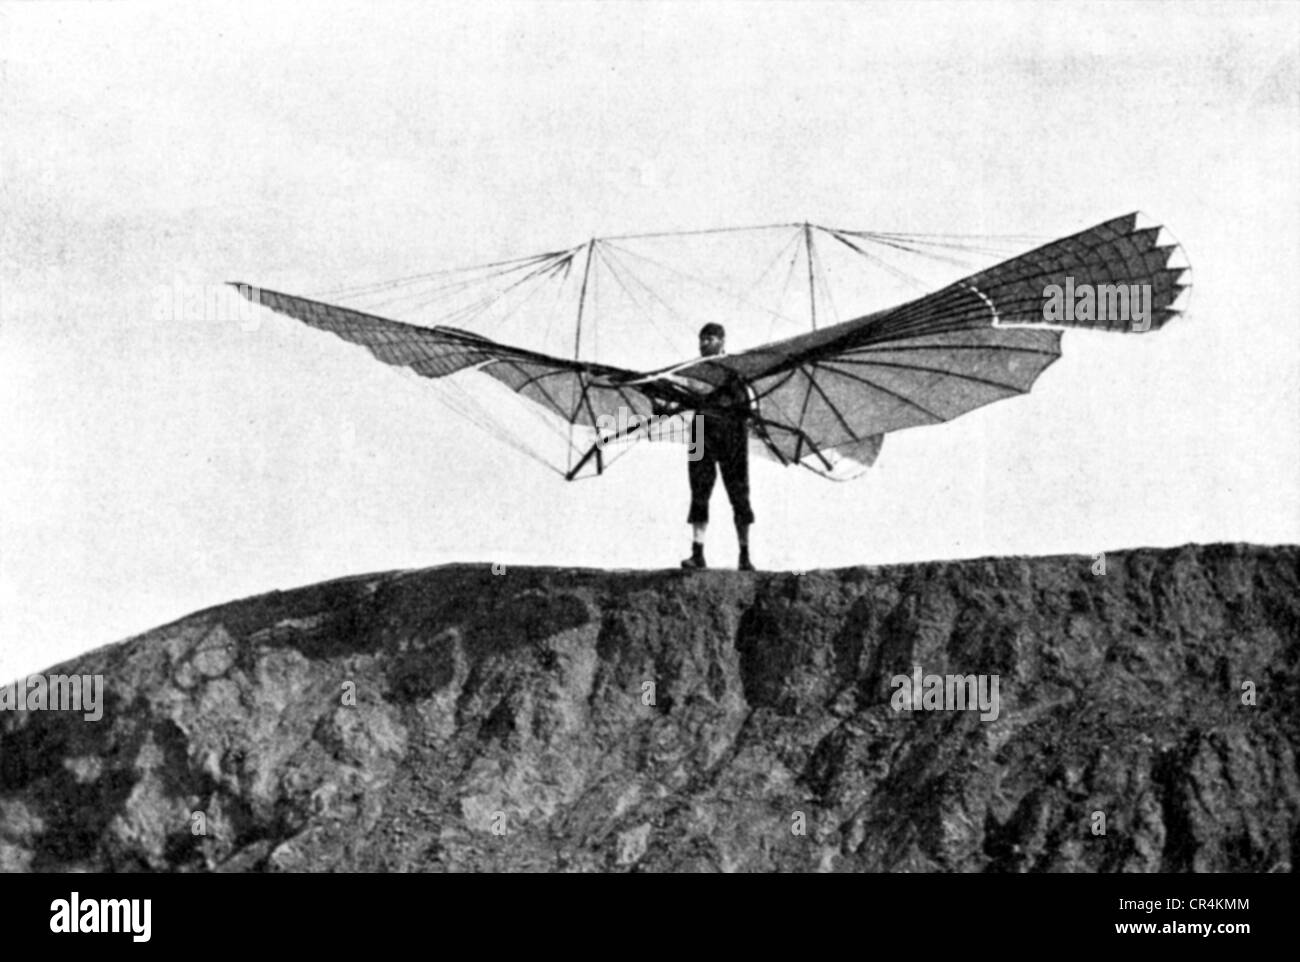 Lilienthal, Otto, 23.5.1848 - 10.5.1896, German aviation pioneer, full length, ready for take off with his hang glider, 1896, photo: Ottomar Anschuetz, Stock Photo